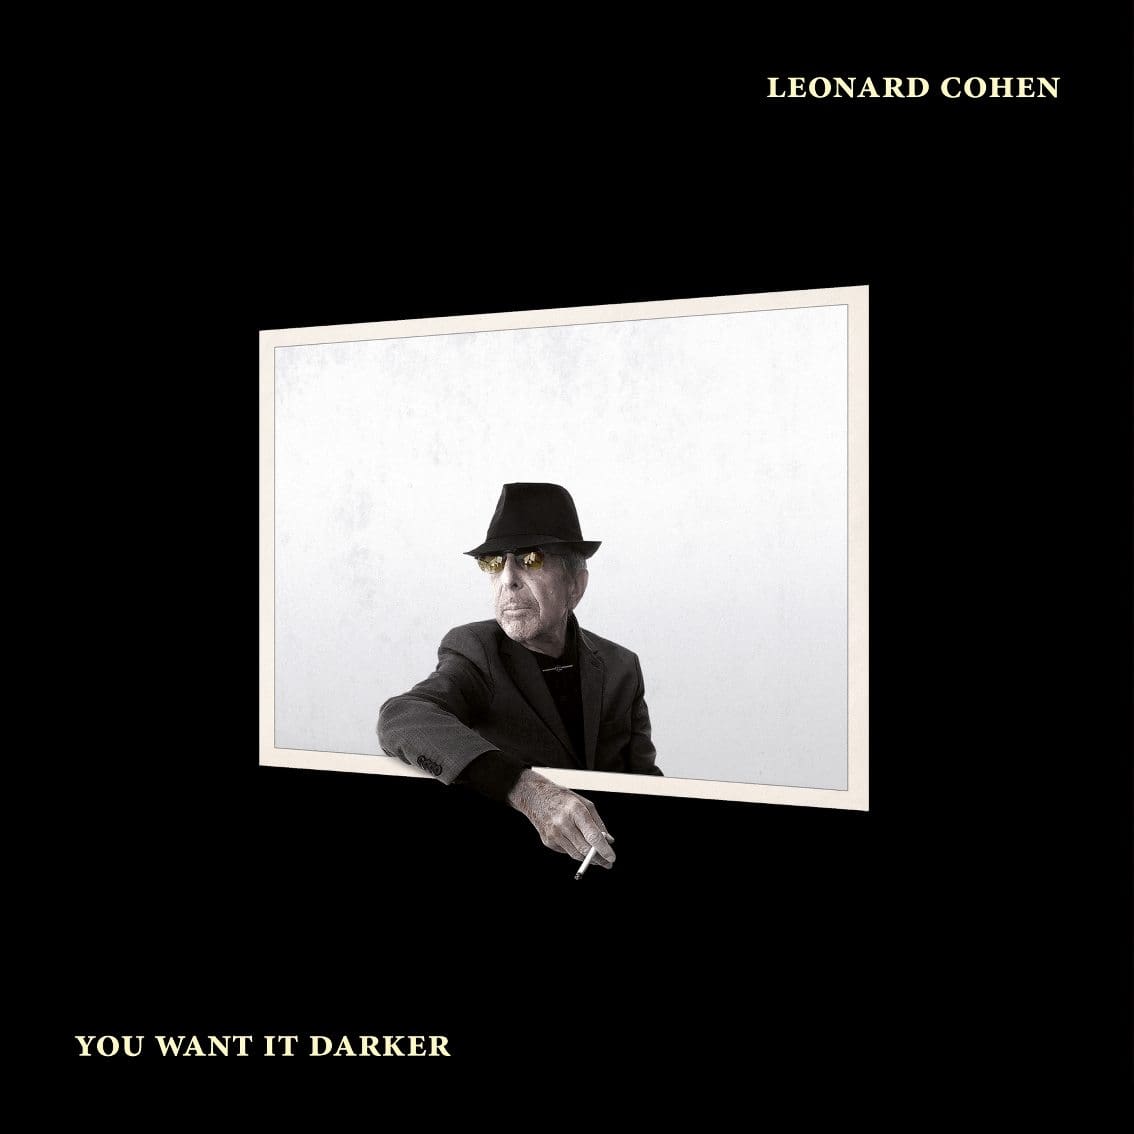 New Leonard Cohen album coming up, 'You want it darker', and it might be his last one